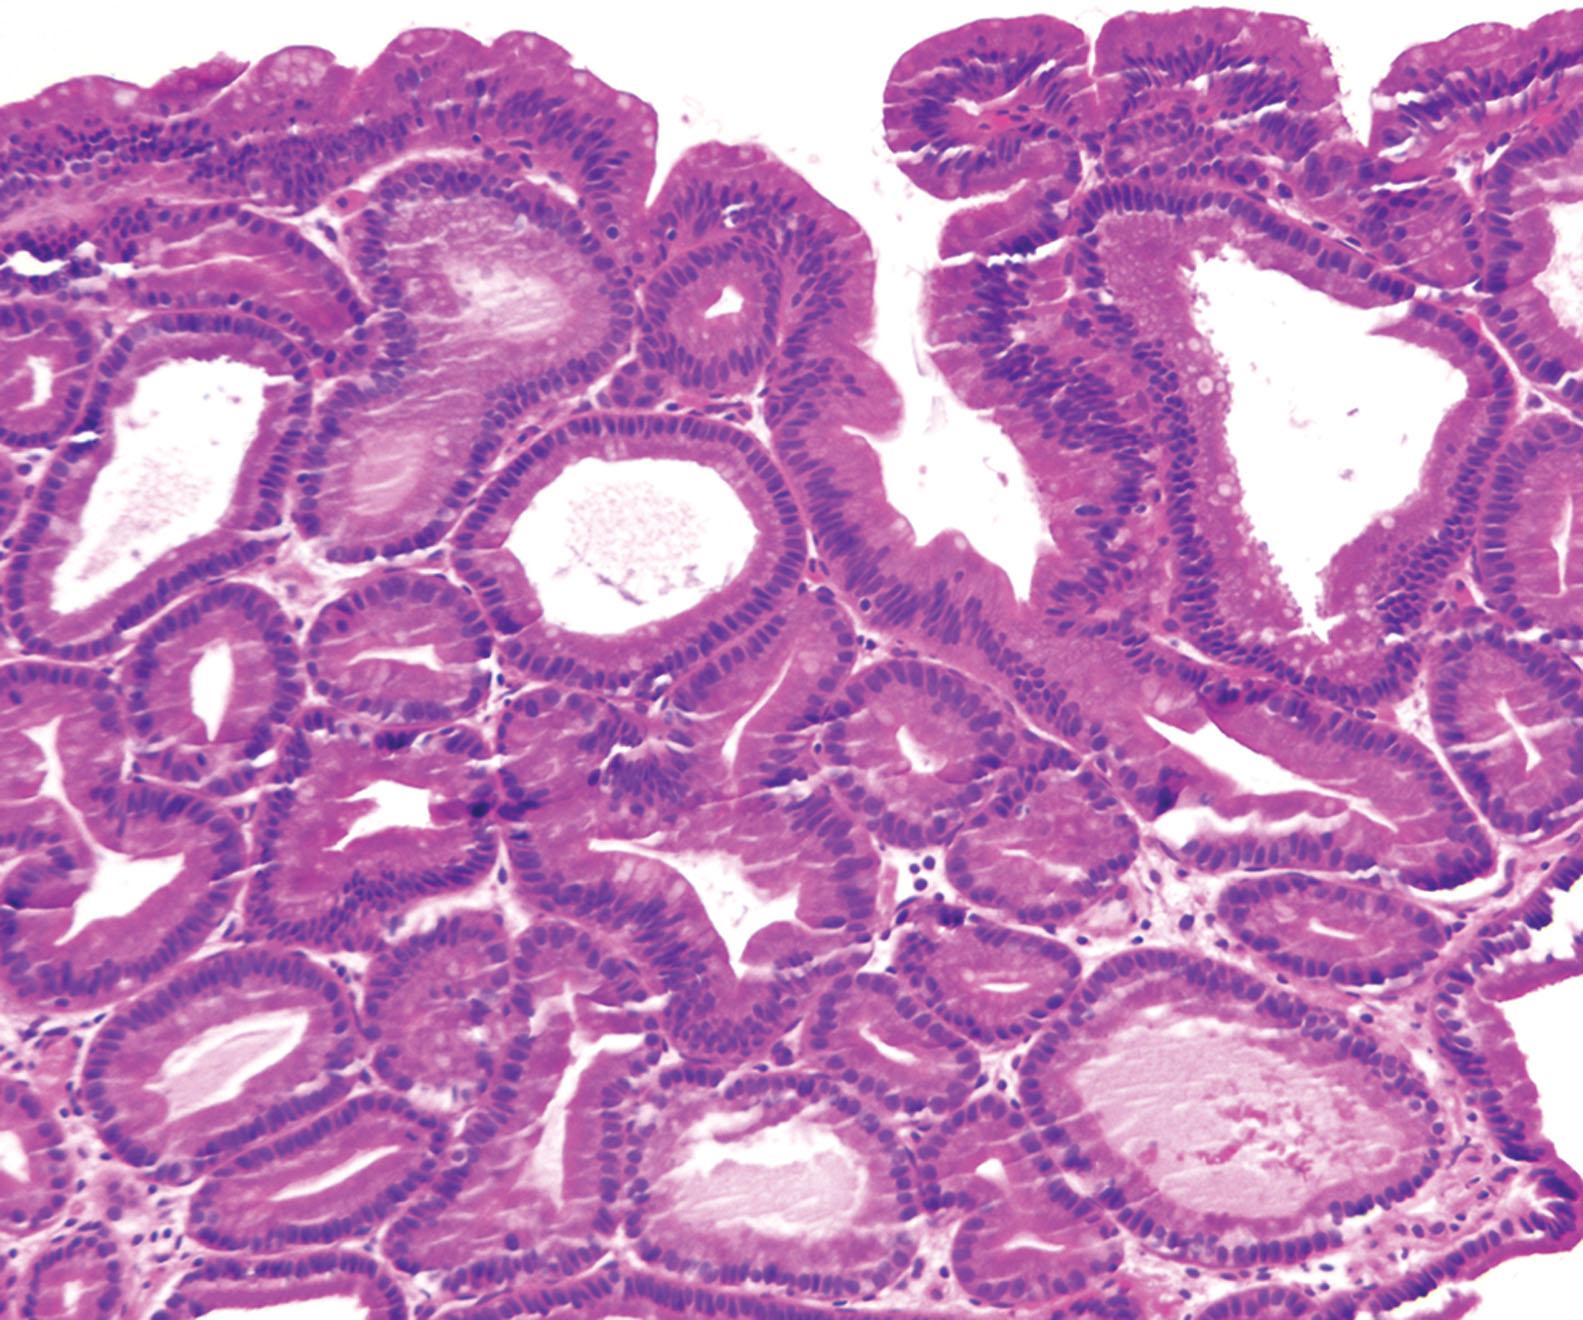 Figure 6.6, Pyloric gland adenoma: Tightly packed glands lined by cuboidal epithelium with basally located round nuclei. The epithelial cells have abundant eosinophilic cytoplasm with a “ground-glass” appearance and without an apical mucin cap.